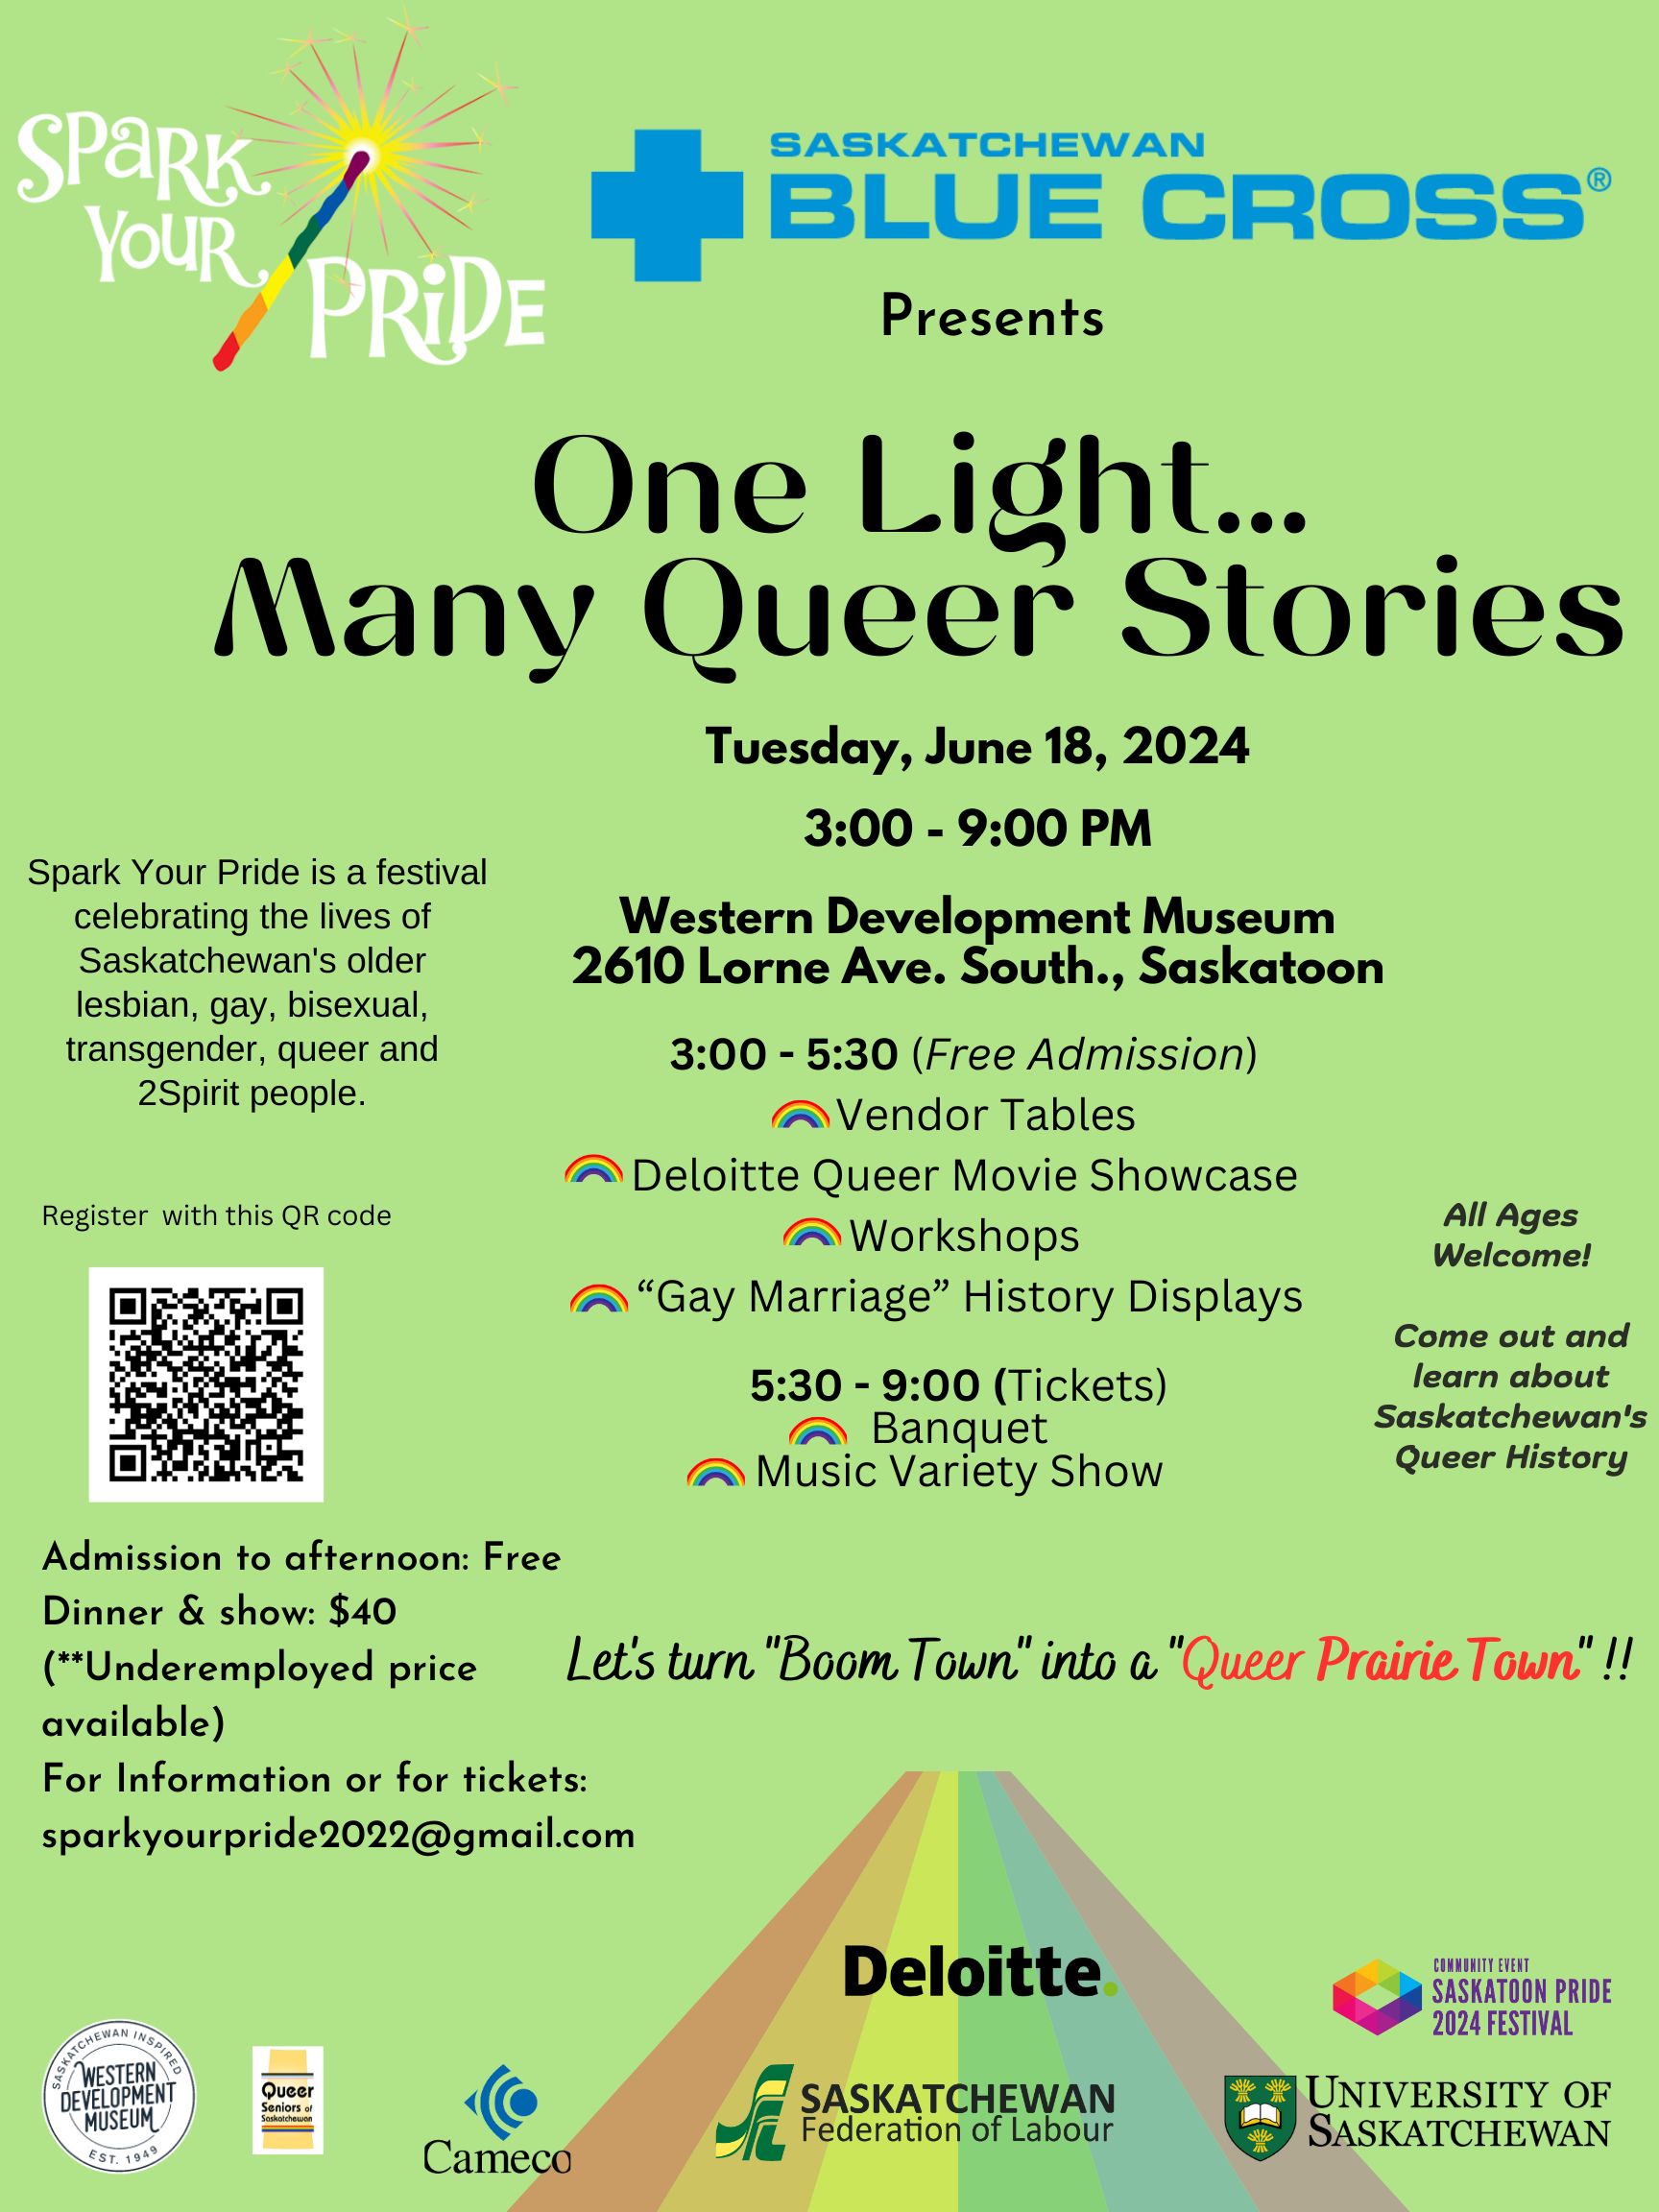 Image of the poster for Spark Your Pride